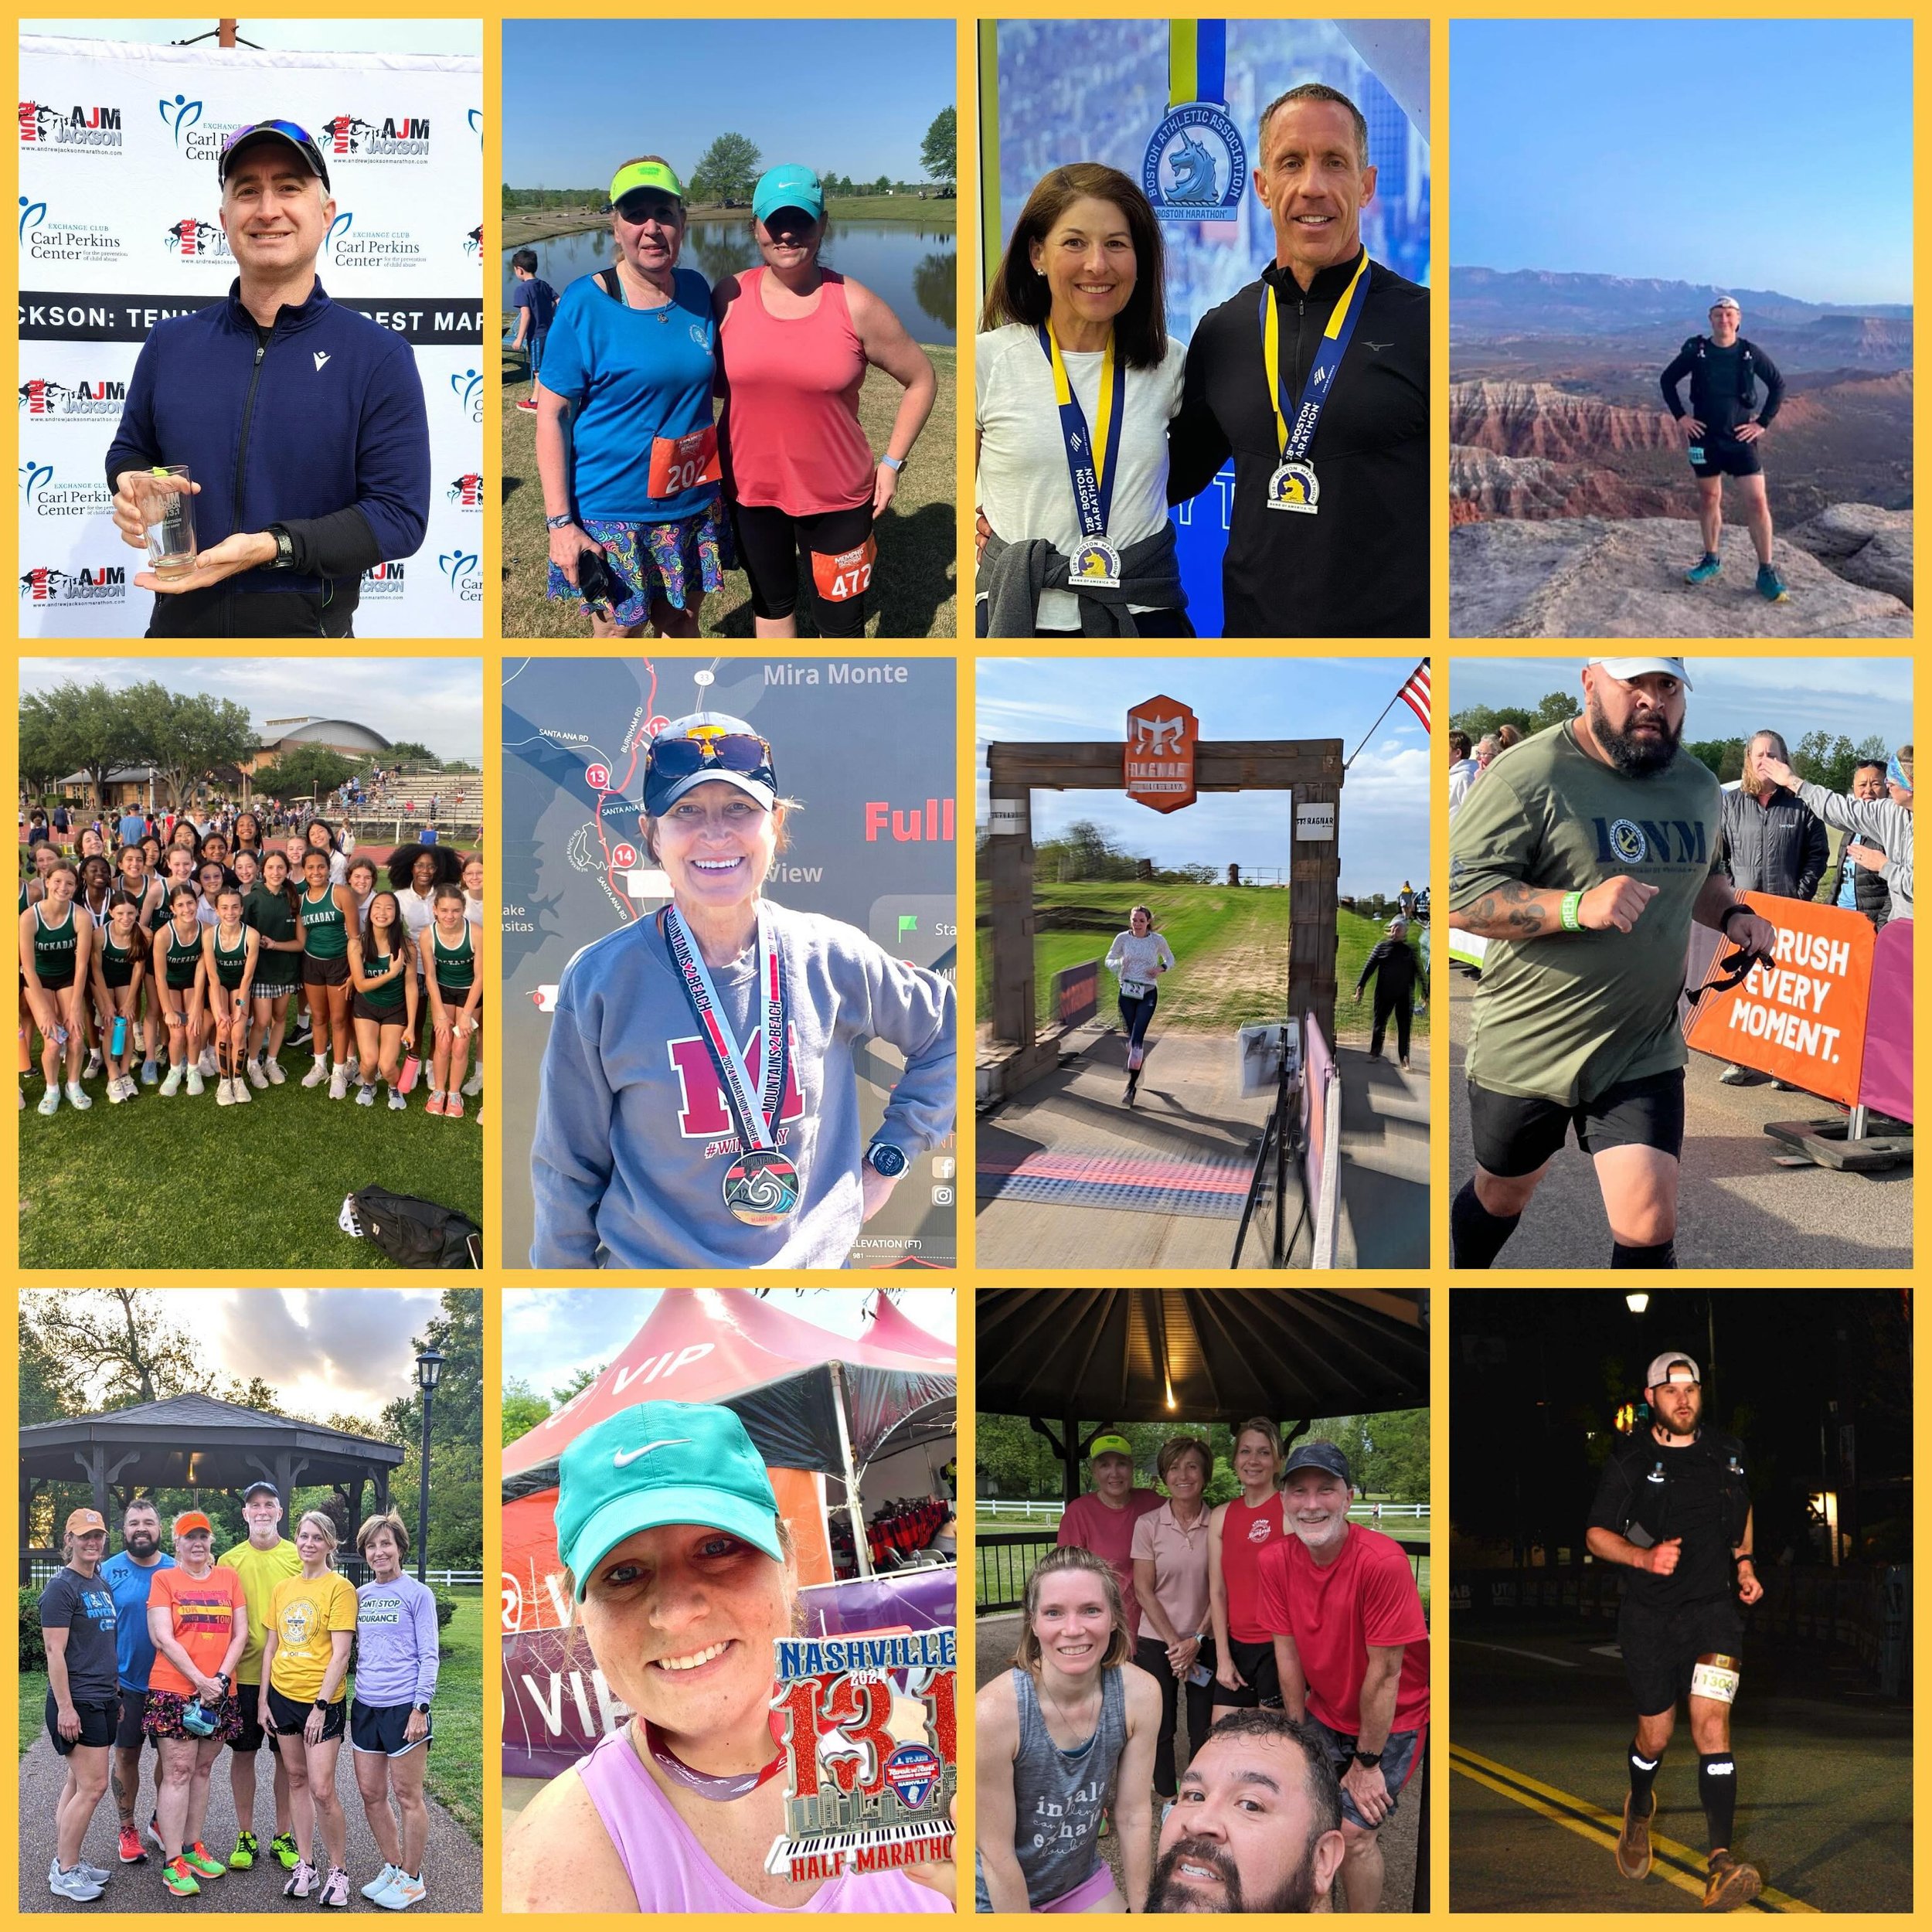 In April, we raced in 7 states at distances from 5K to 100K. 👊💪🙌🏆 Small daily habits, hard, smart training and a strong mindset lead to running success. Congrats everyone. Next? May racing &amp; training. Need help? We would love to help you too.